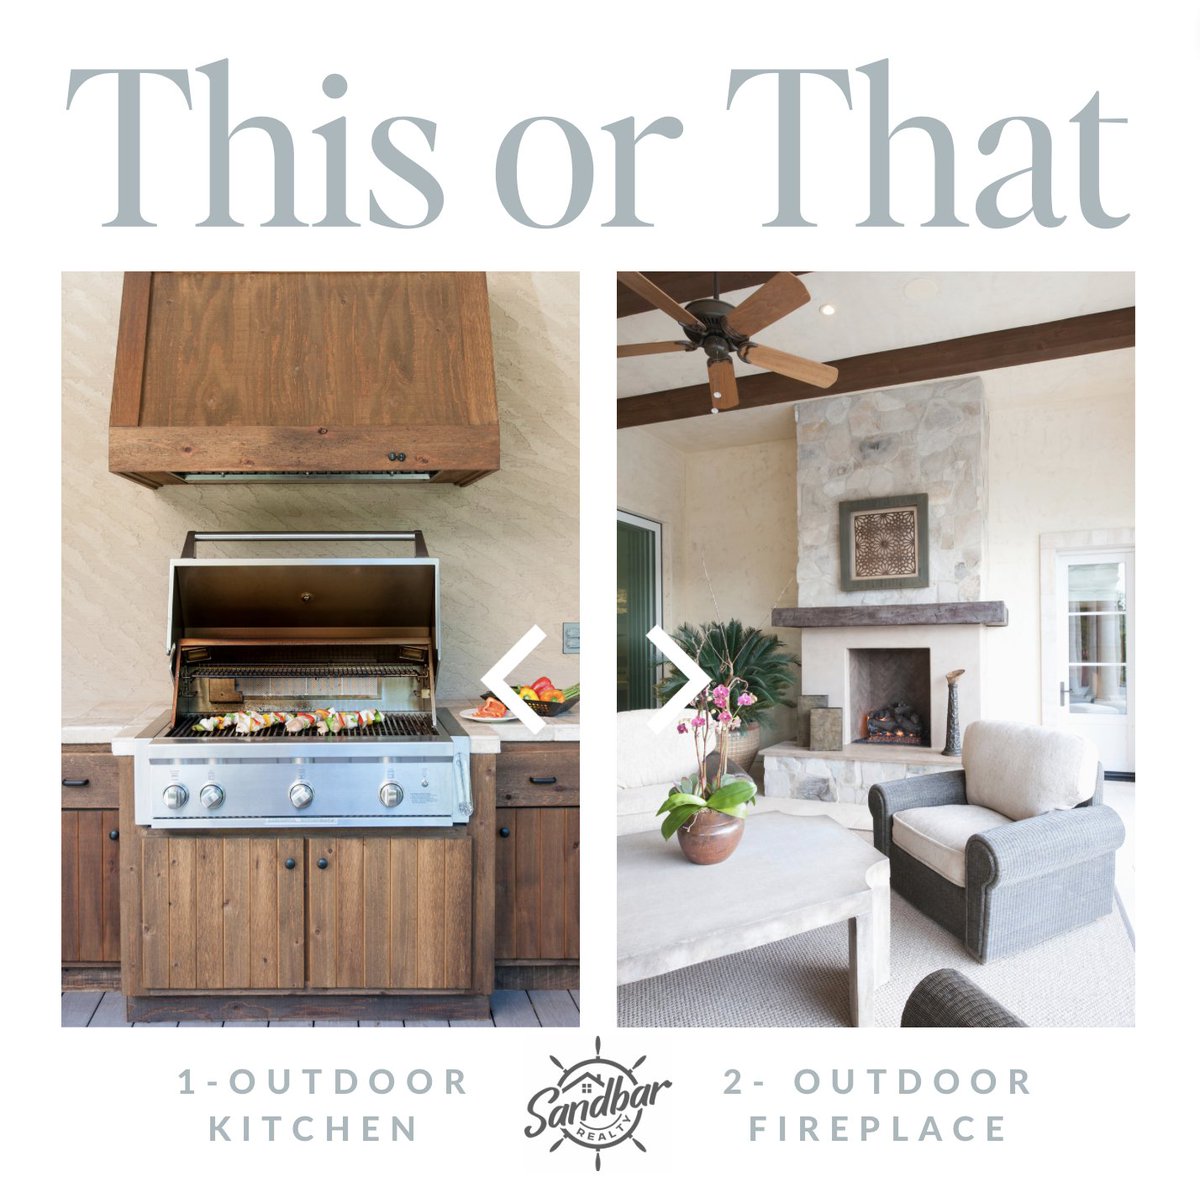 #Summer is here, and it’s time to get outside!☀️ Which #outdoor feature is a must for your next #home? 

🍖 #OutdoorKitchen 
🔥 #OutdoorFireplace 

Tweet us with 🍖 or 🔥 to let us know! 
#outdoorliving #outdoorkitchen #grill #jacksoville #jaxfl #duval